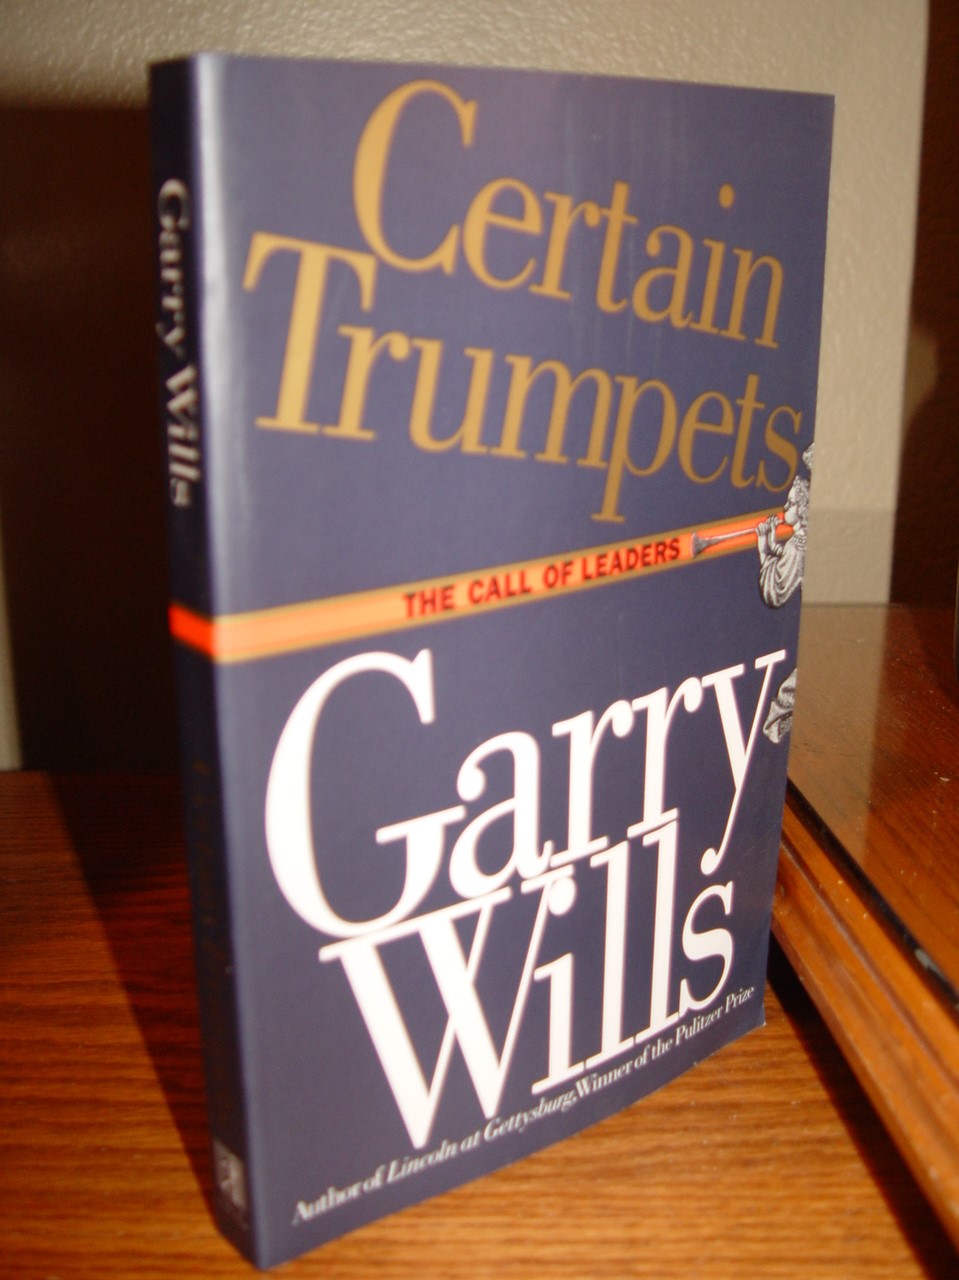 Certain Trumpets: The Call of Leadership 
                        1994 by Garry Wills, Simon & Schuster